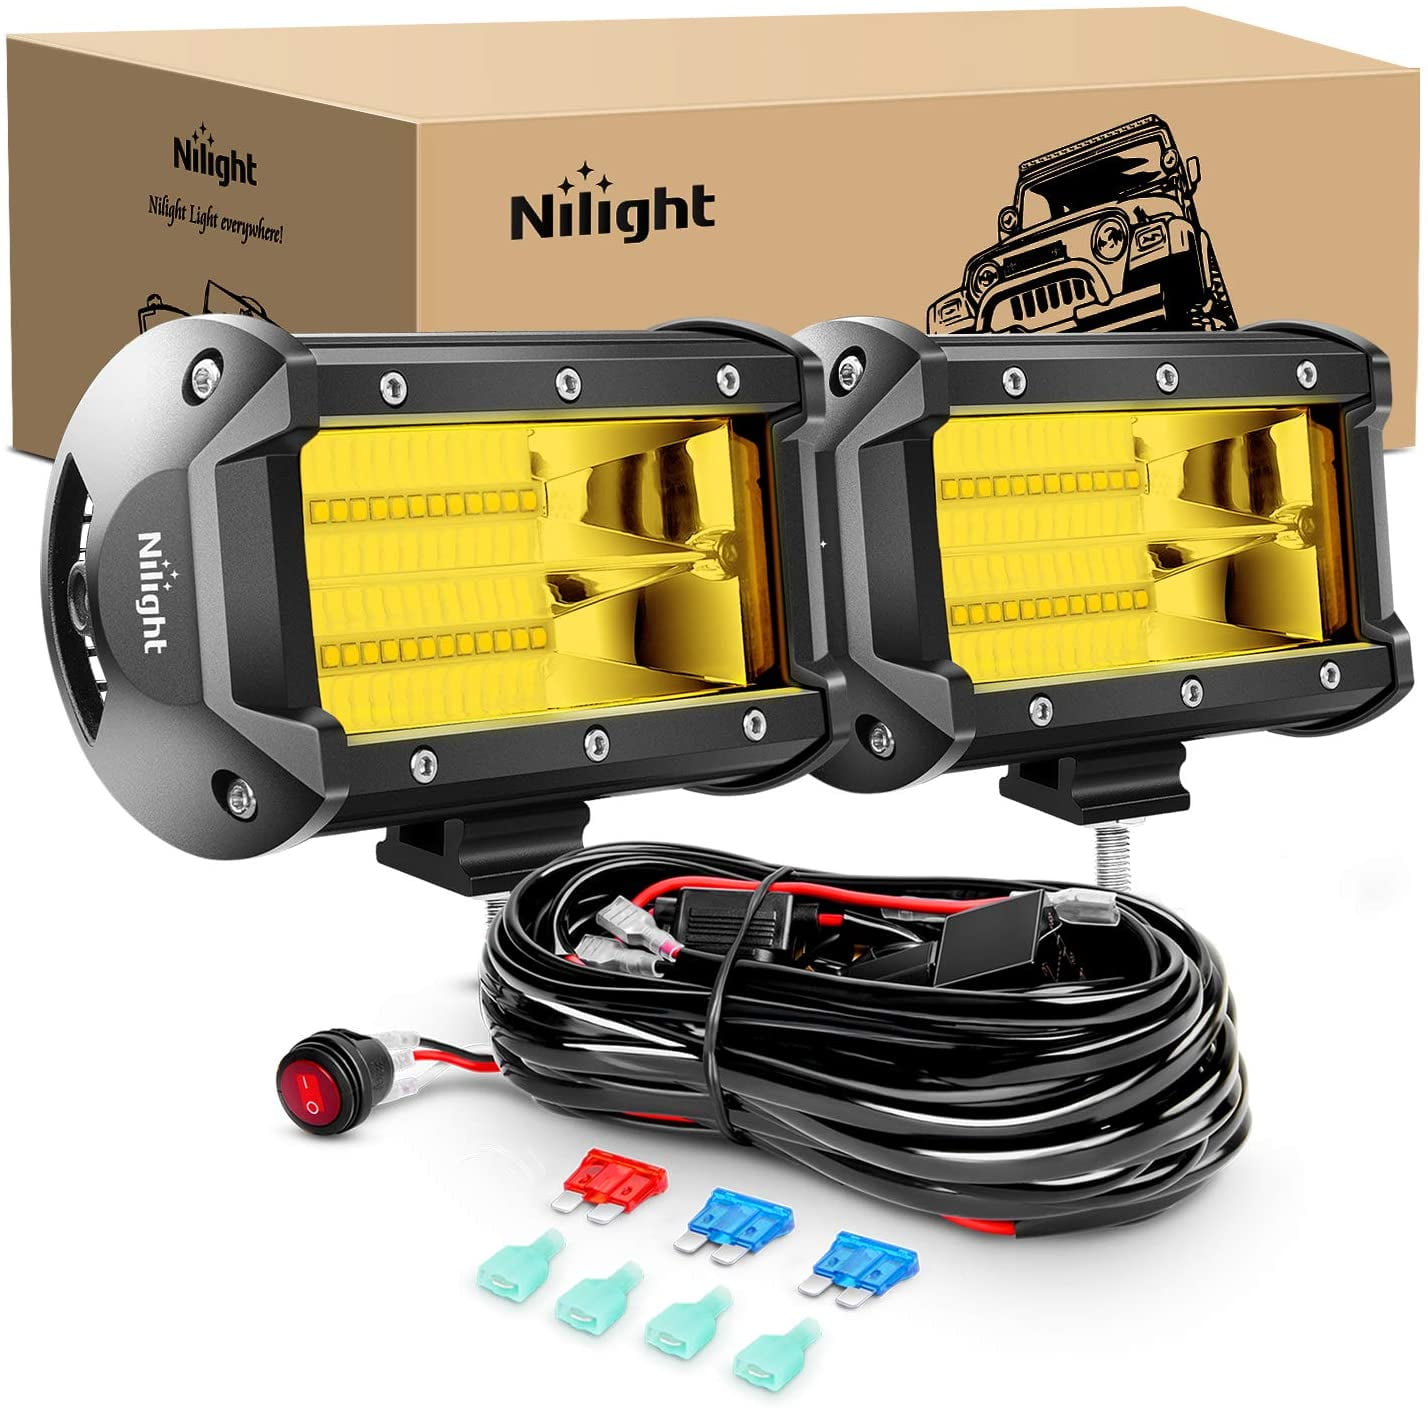 Nilight Led Light Bar 2PCS 5Inch 72W 10800Lumens Yellow Flood Beam Fog Driving  Lamps Off-Road Lights with 16AWG Wiring Harness Kit-2 Lead